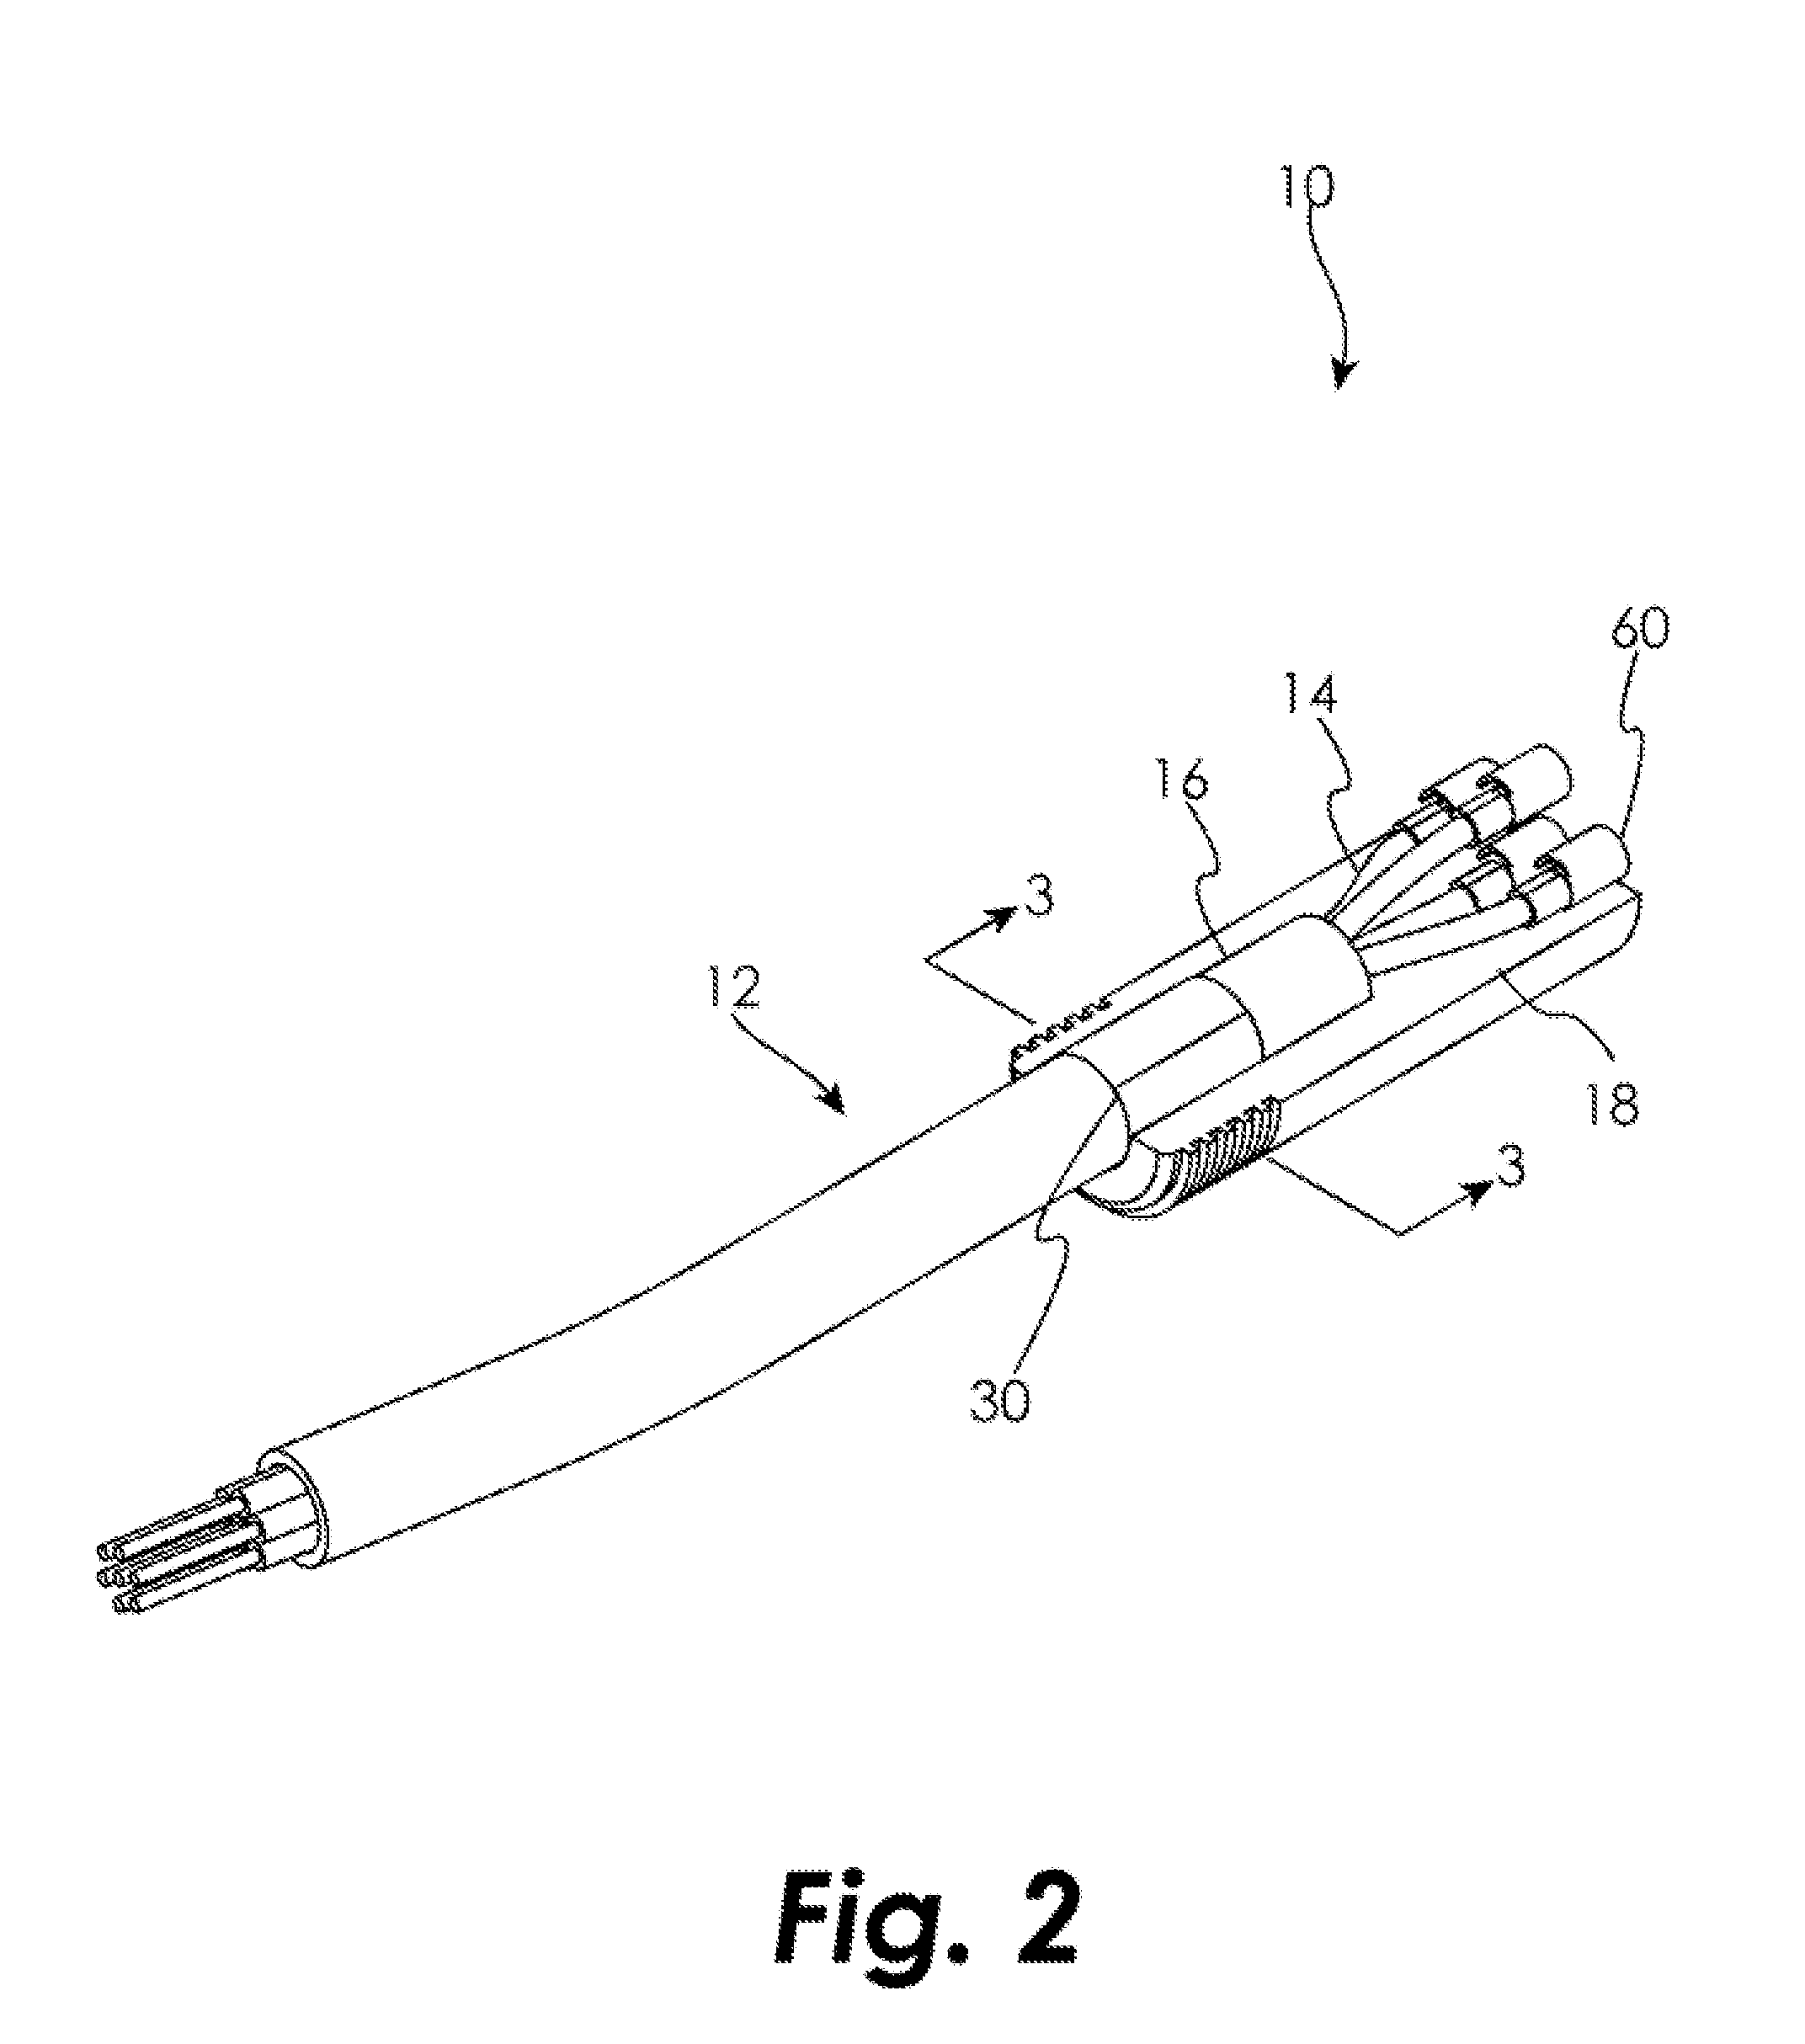 System and Method for Polyurethane Bonding During and After Overmolding